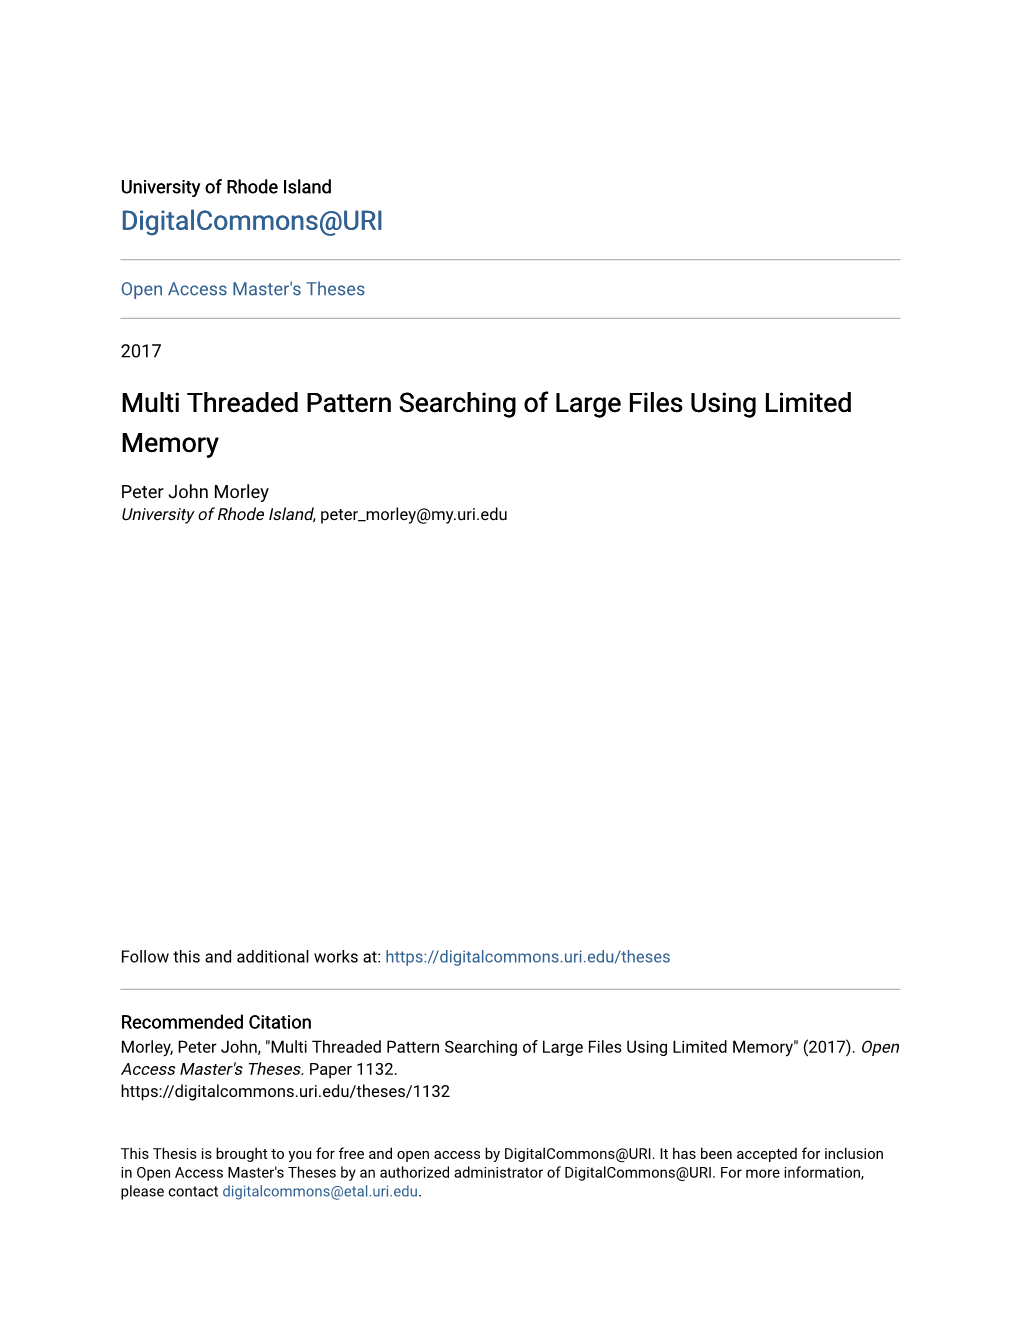 Multi Threaded Pattern Searching of Large Files Using Limited Memory